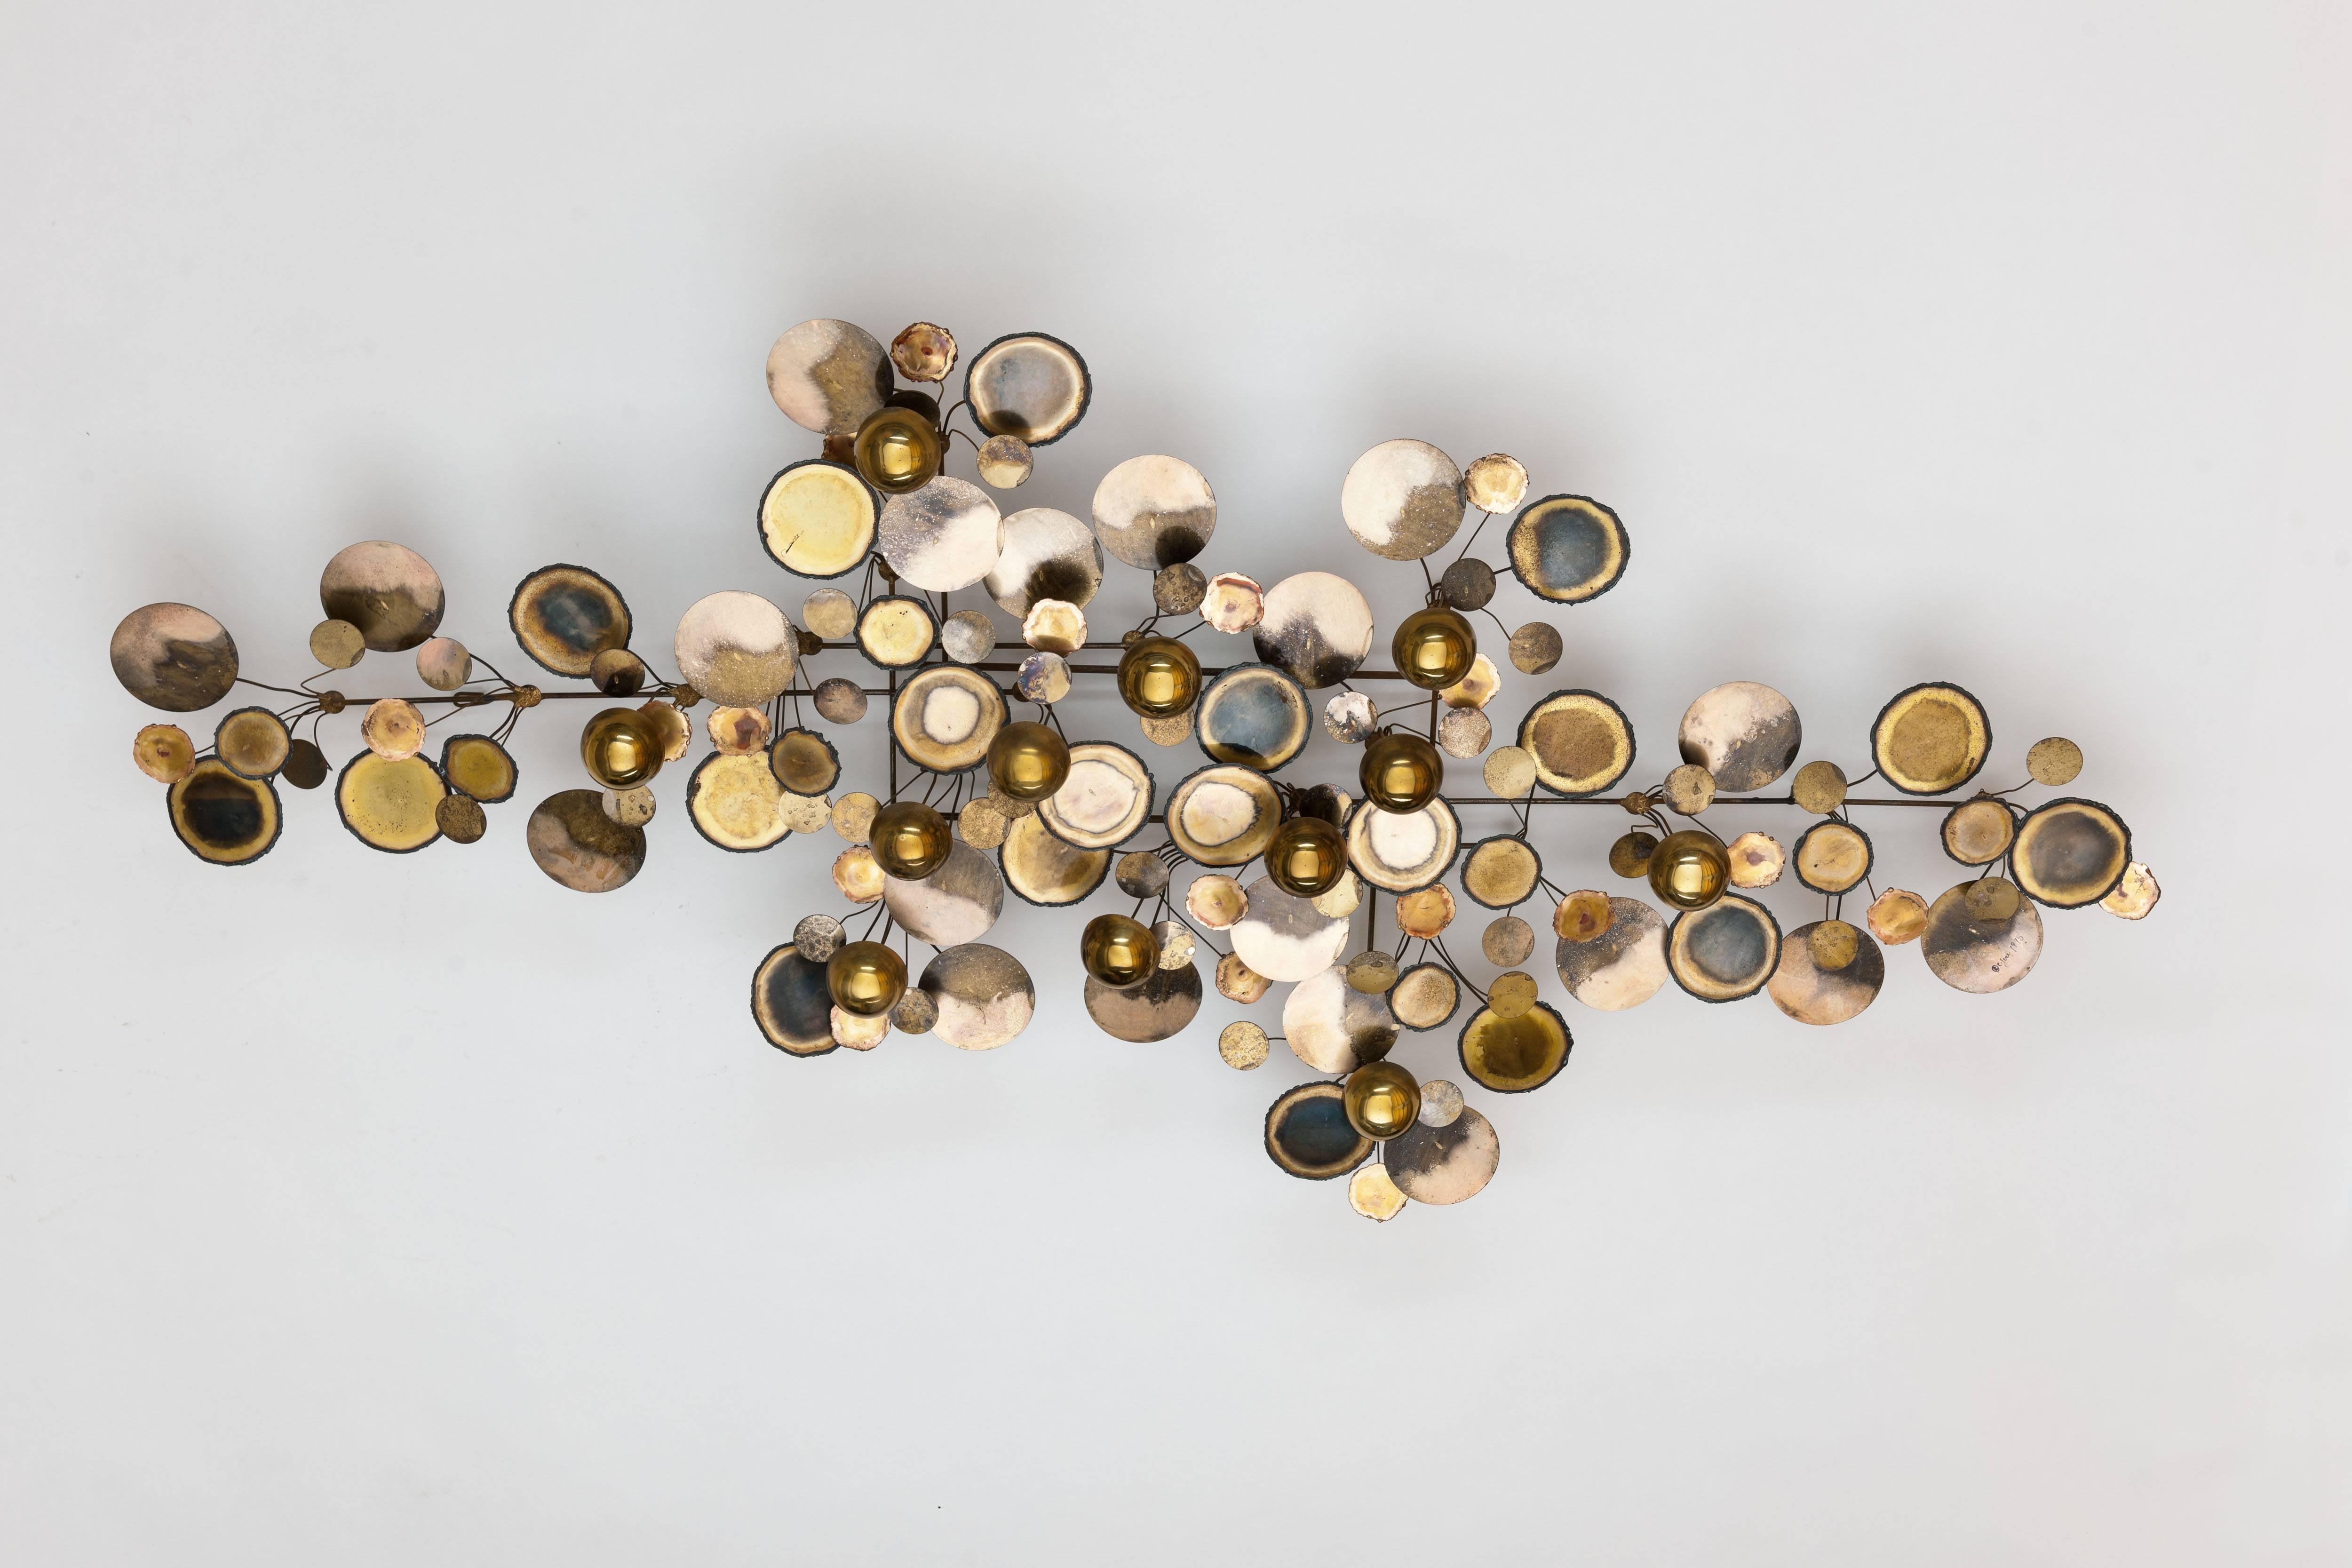 Iconic 'Raindrops' wall sculpture by C. Jere / Artisan house, in brass execution.
Abstract metal wall sculpture of torched edge disc's and half spheres made originally between 1965-1979. Object is fully signed including manufacturing year (1975)